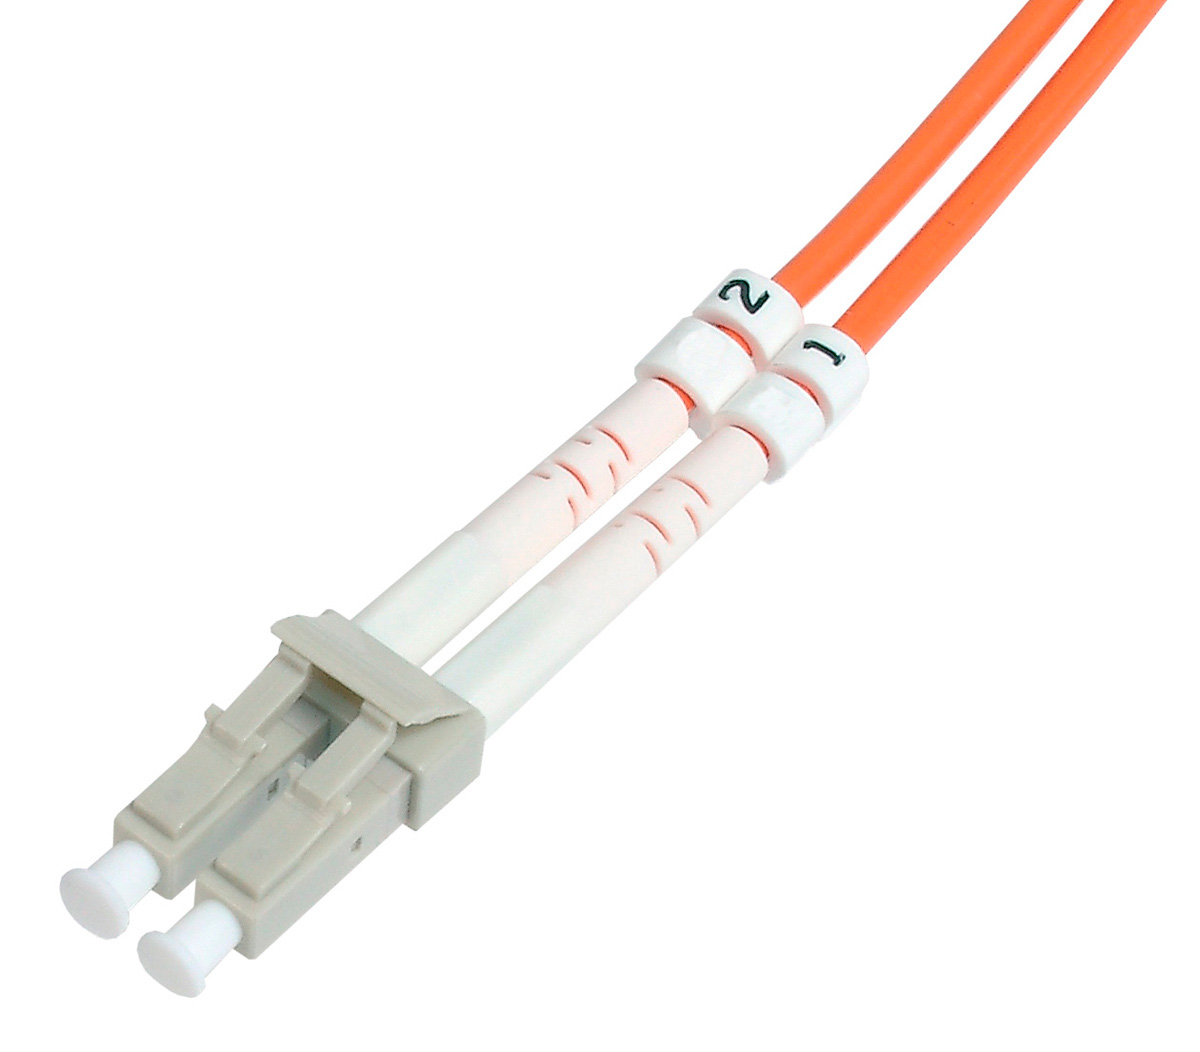 Full Form Of Lc Patch Cord